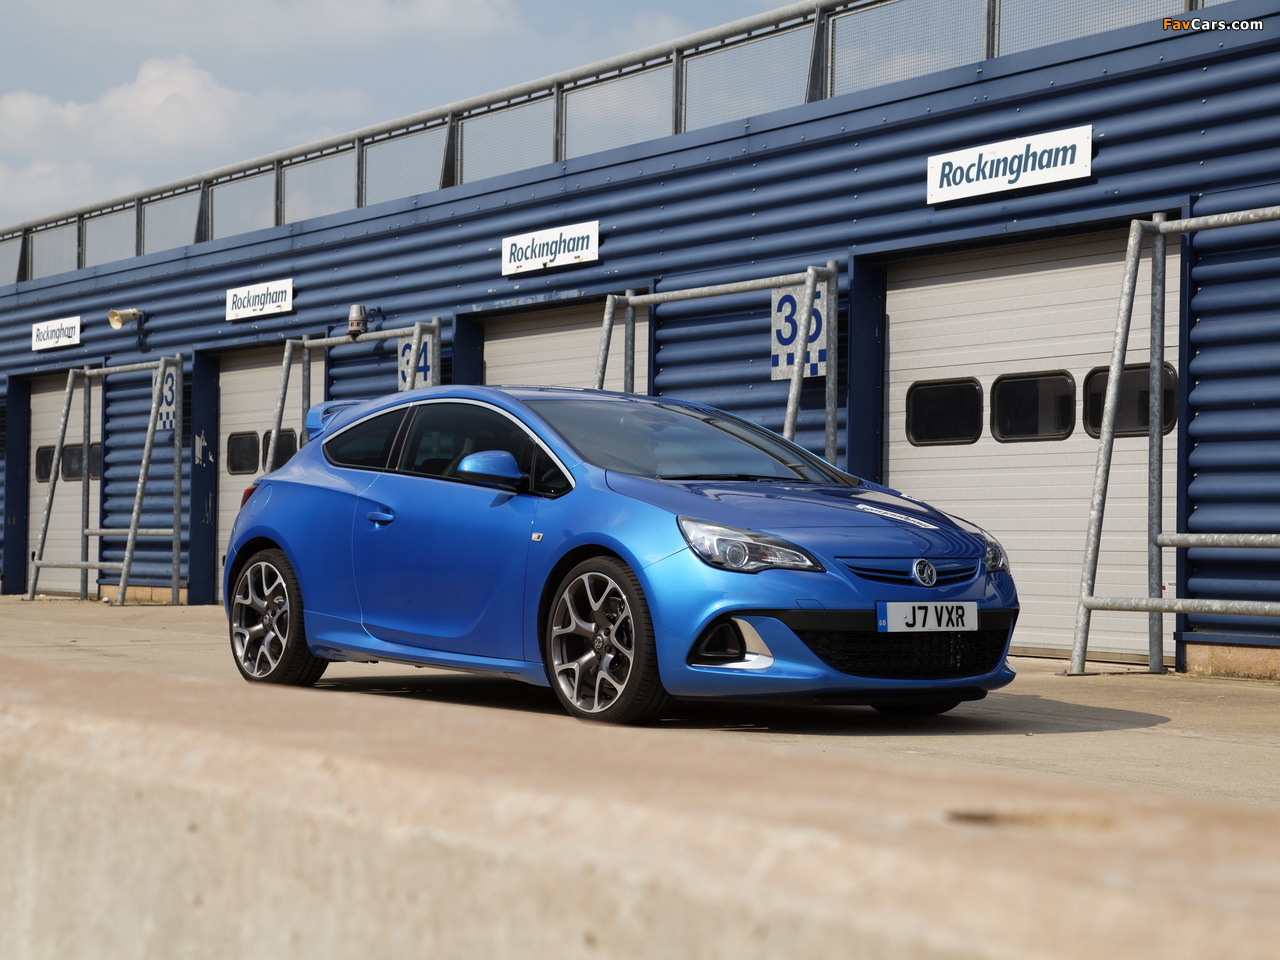 Vauxhall Astra VXR 2012 images (1280 x 960)